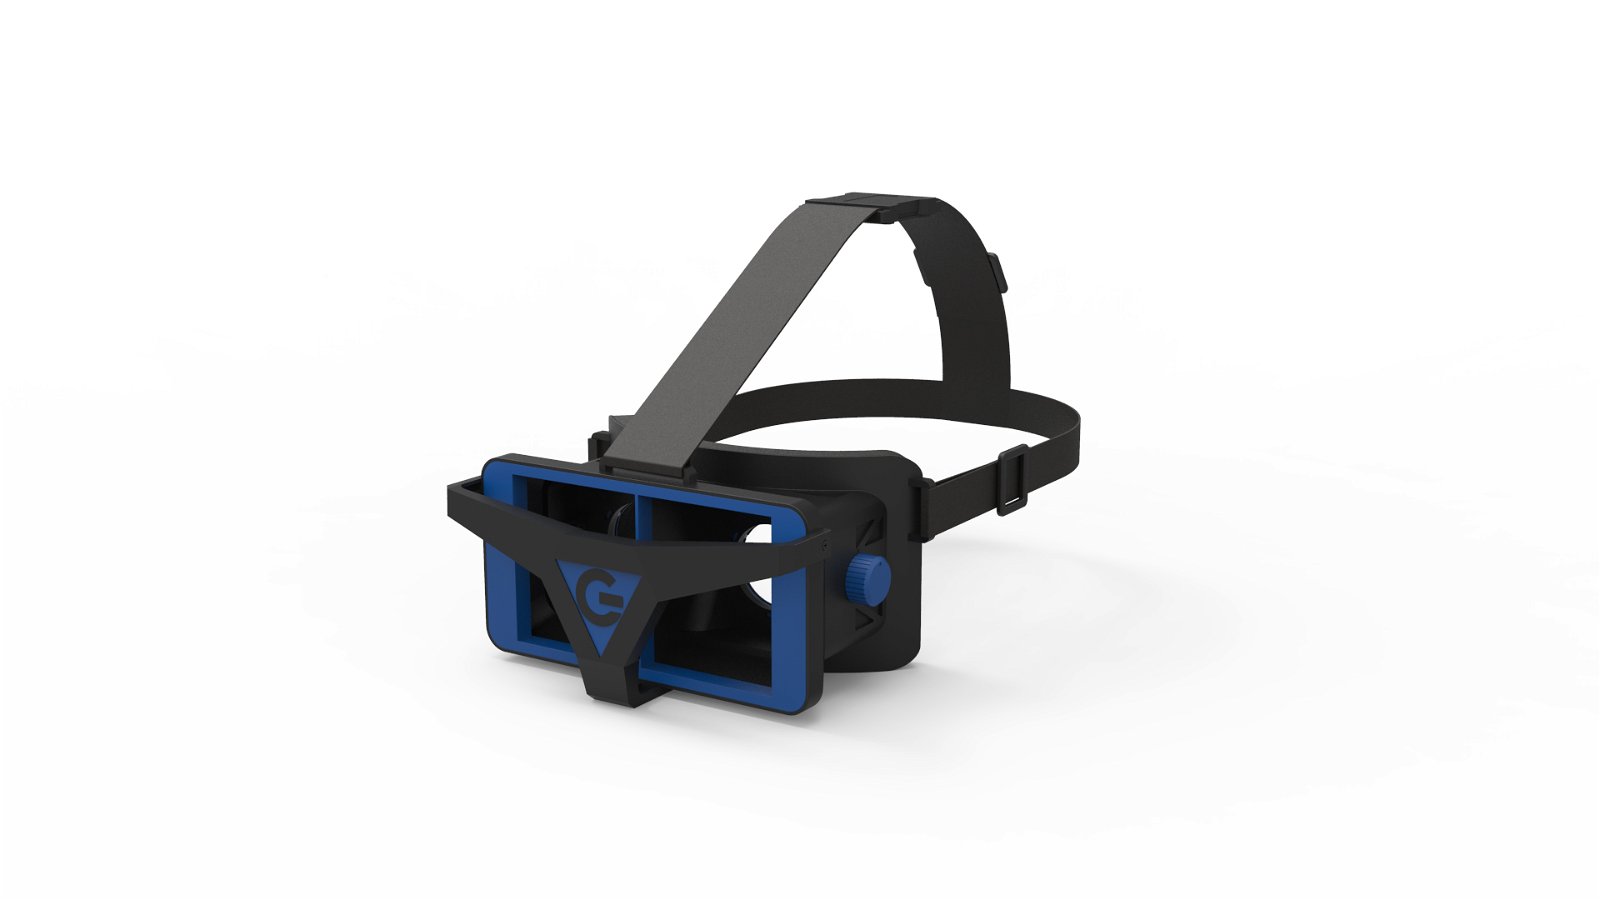 The Lastest vr glasses 3D vr headset display with immersive experience for 3d vr 1